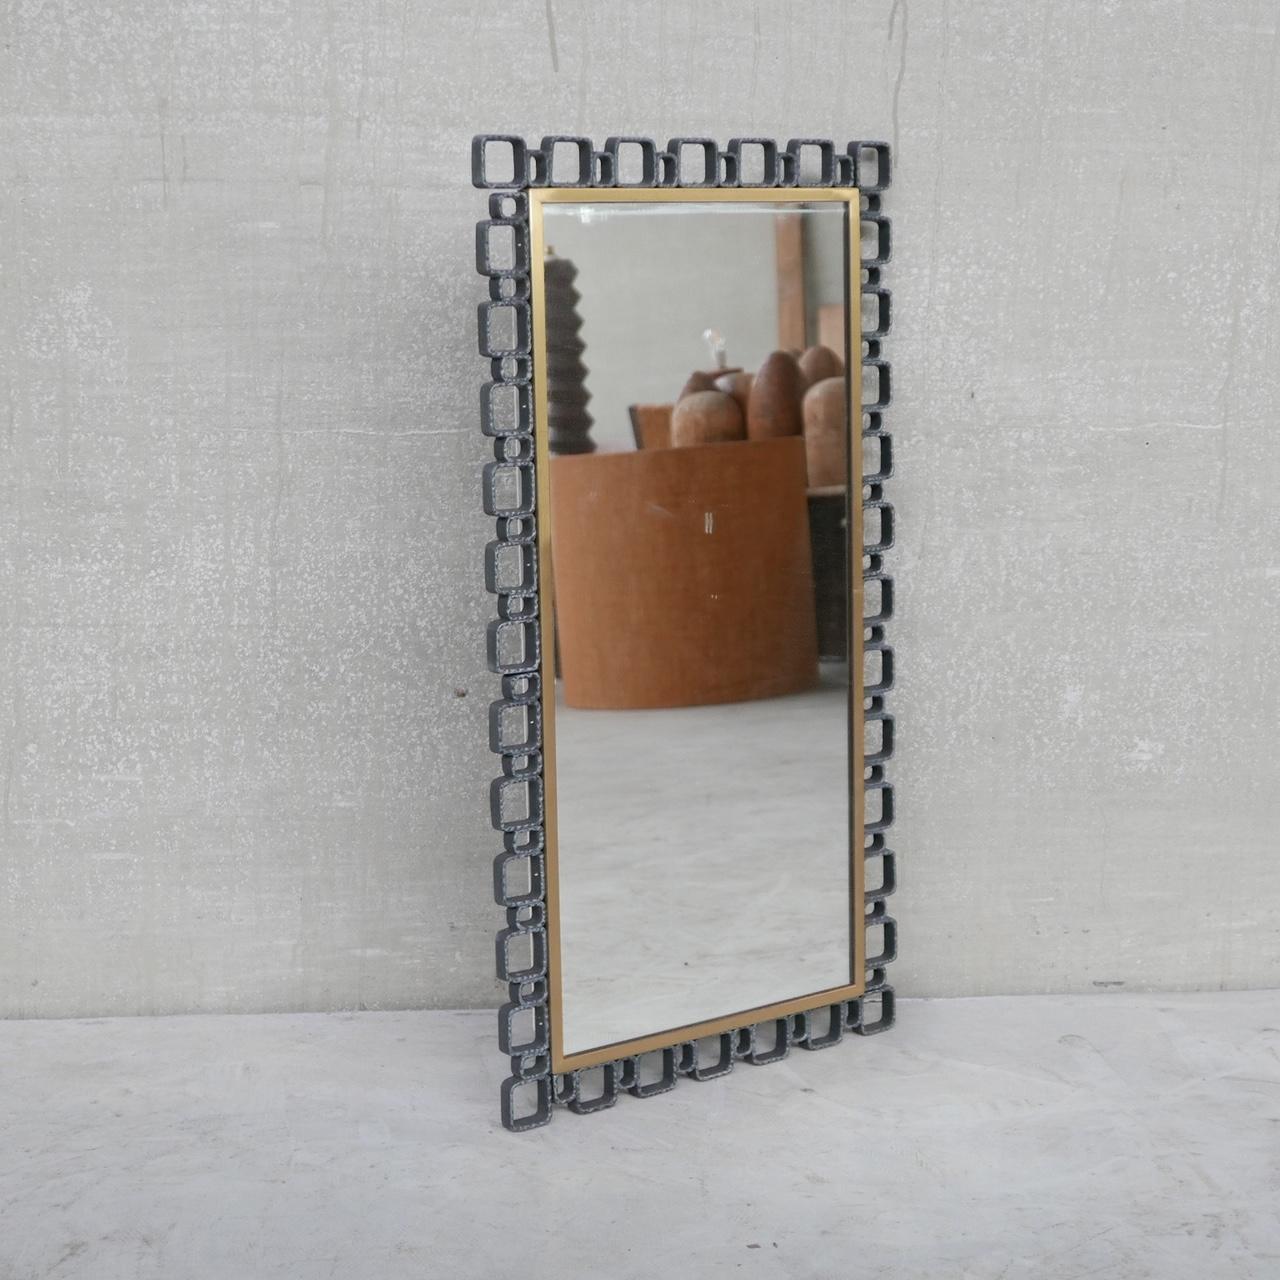 A stylish iron brutalist mirror. 

Belgium, c1970s. 

Iron cubist surround with a brass insert. 

The mirror has the option to be back lit with lighting infrastructure hidden at the back. 

Good condition. 

Location: Belgium Gallery.